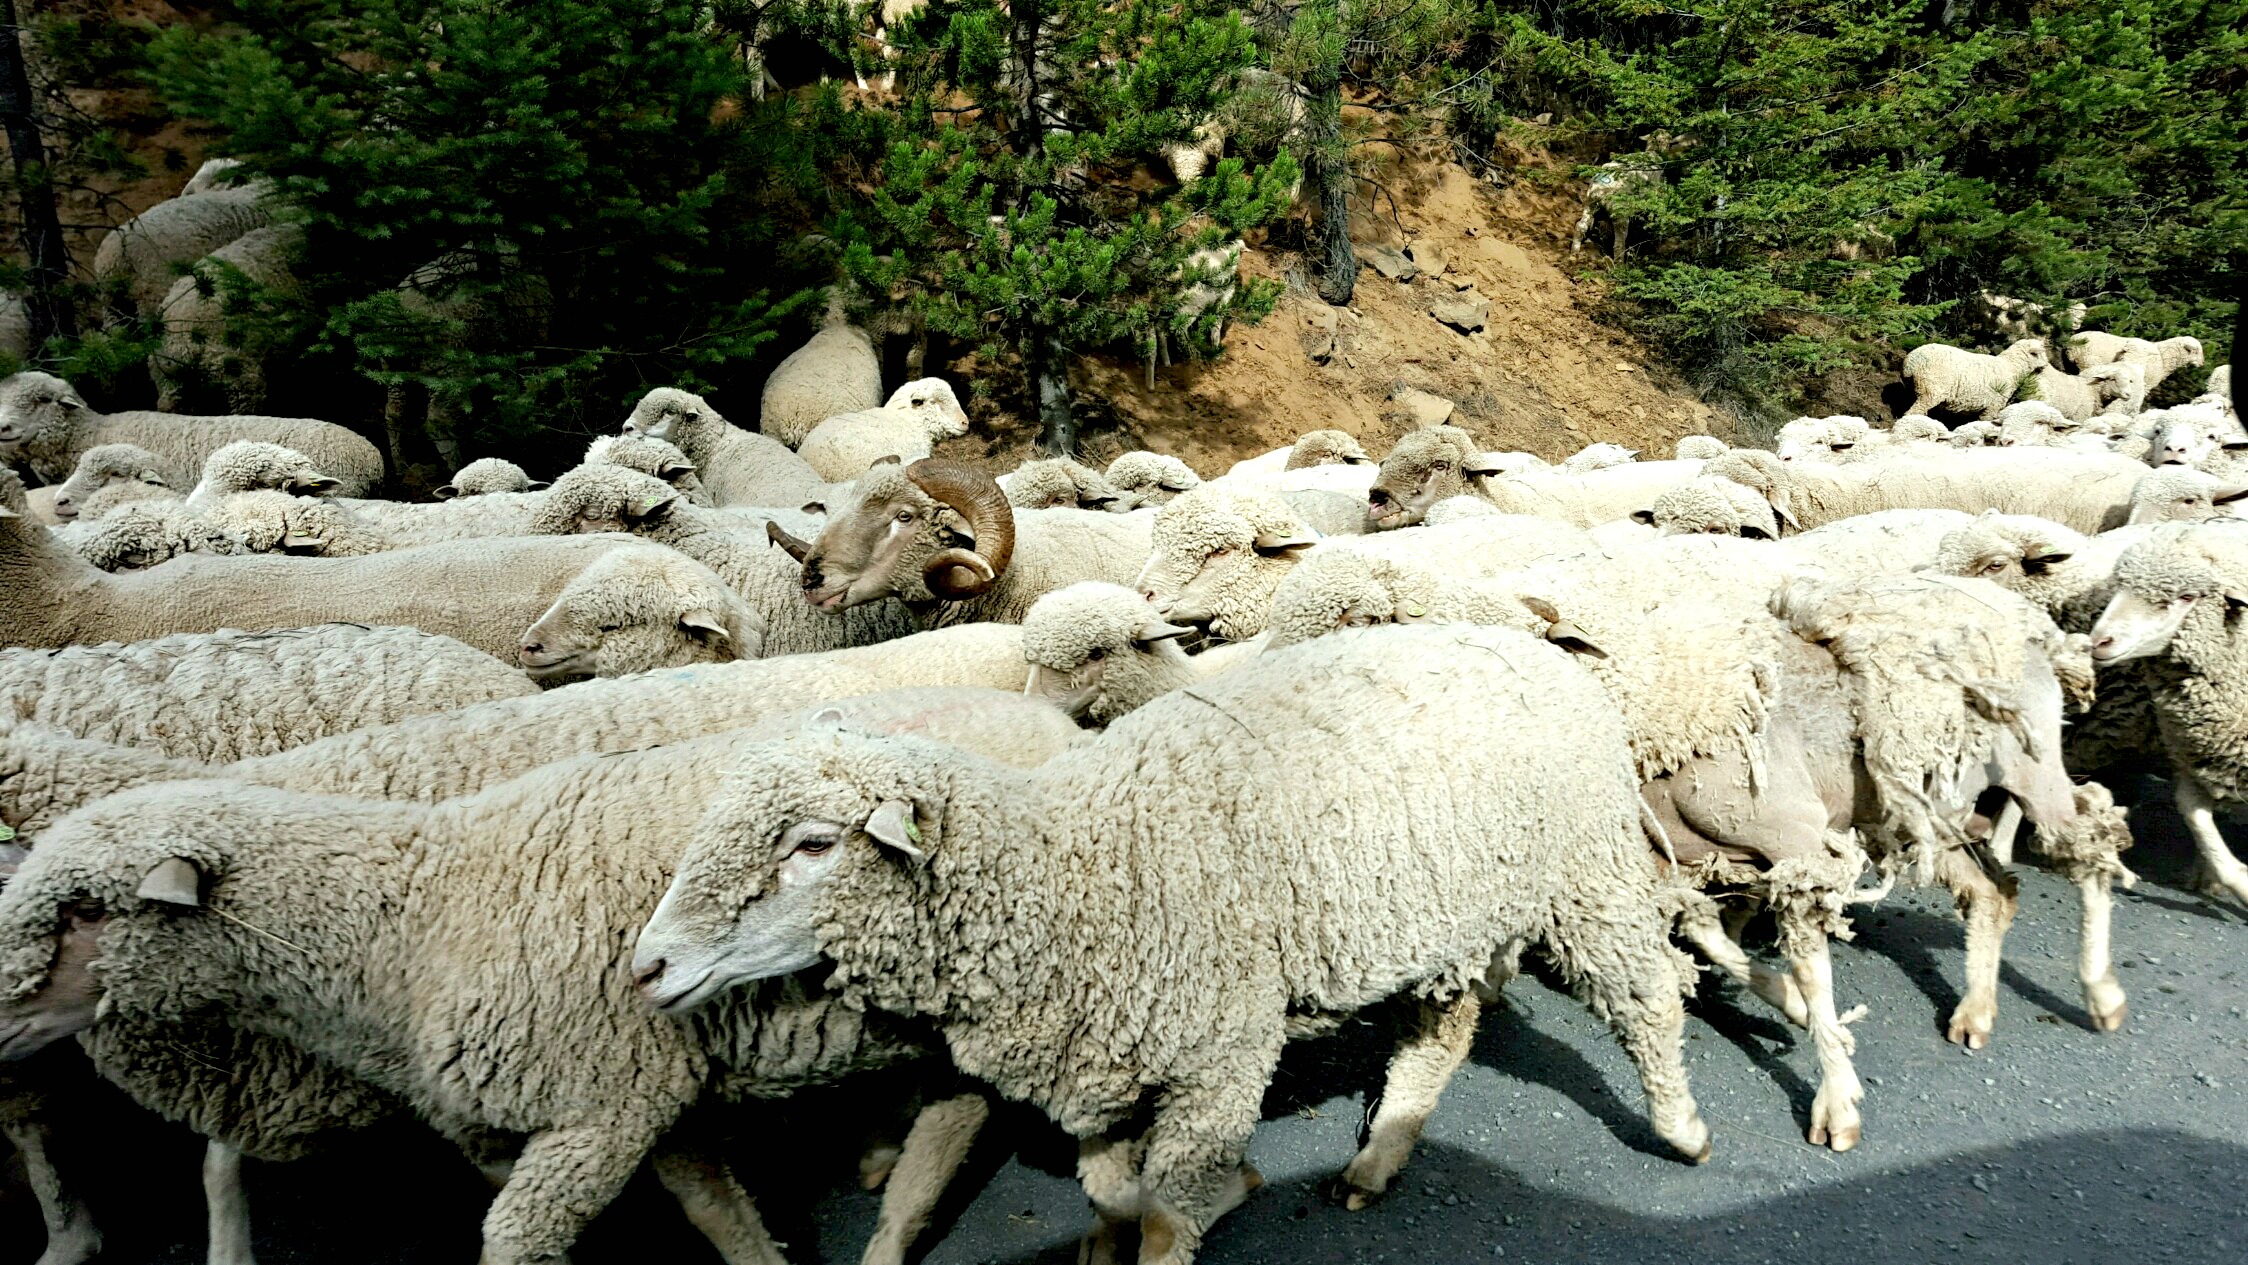 Sheep herding in the Ochoco National Forest